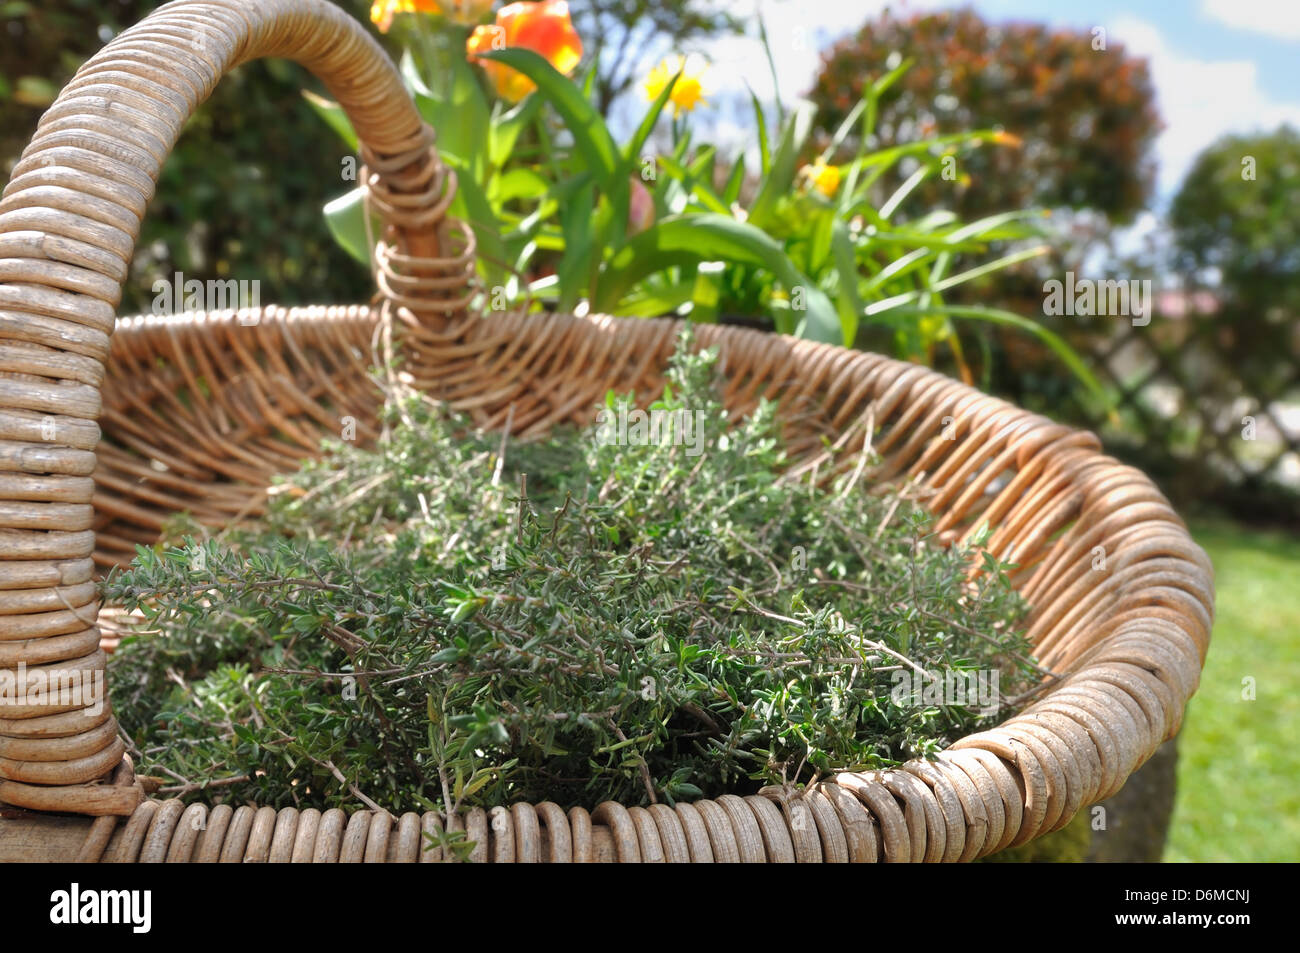 thyme harvested in a wicker basket Stock Photo